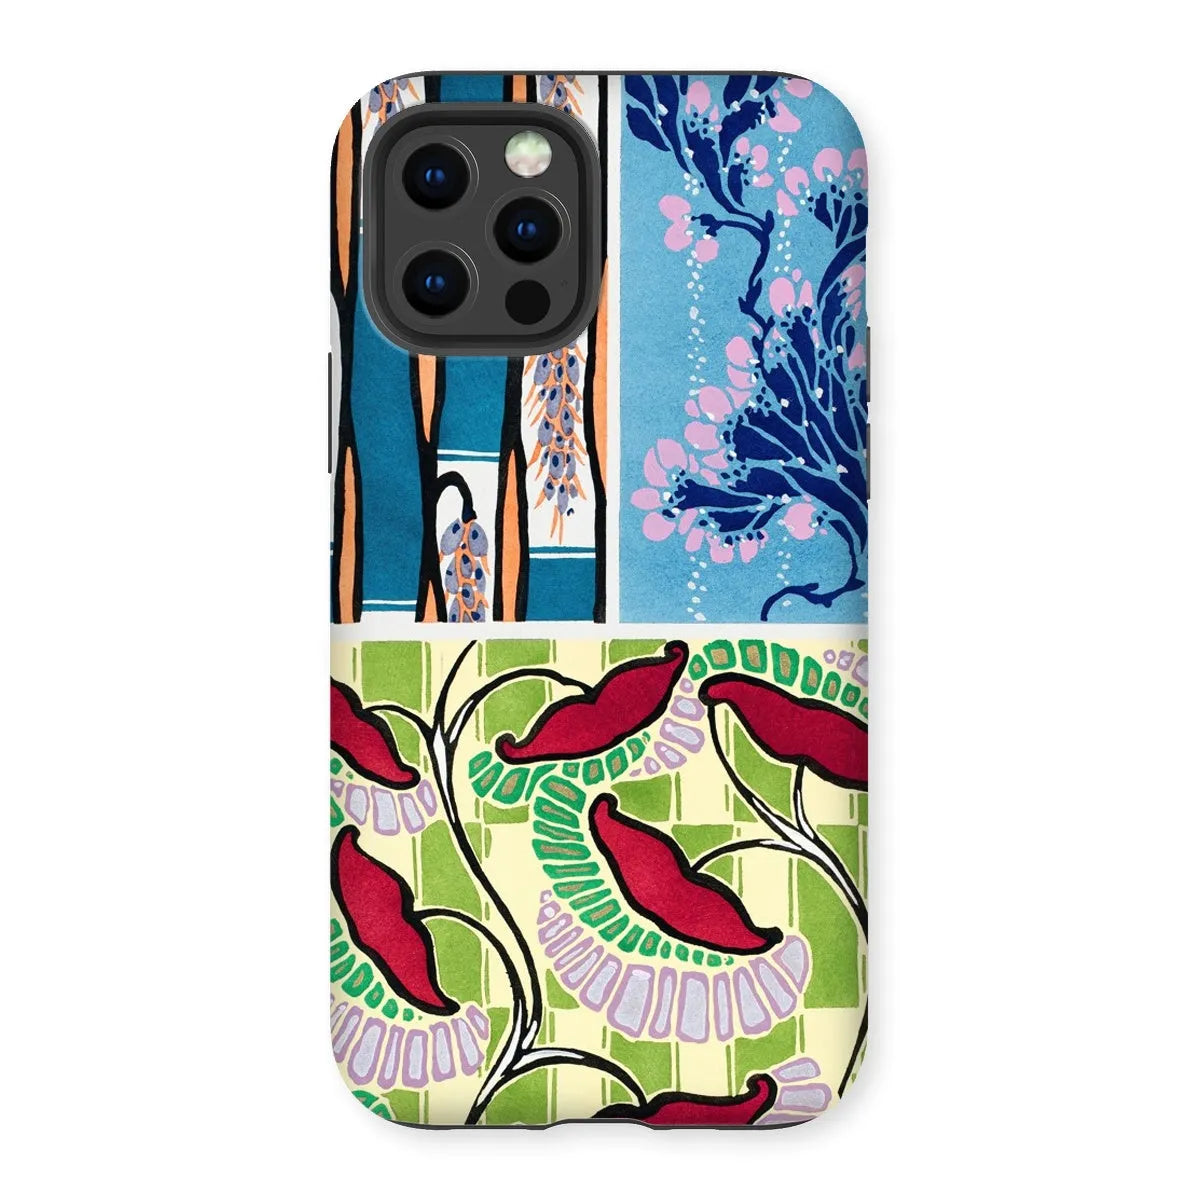 Floral Kitsch Aesthetic Art Phone Case - E.a. Séguy - Iphone 12 Pro / Matte - Mobile Phone Cases - Aesthetic Art